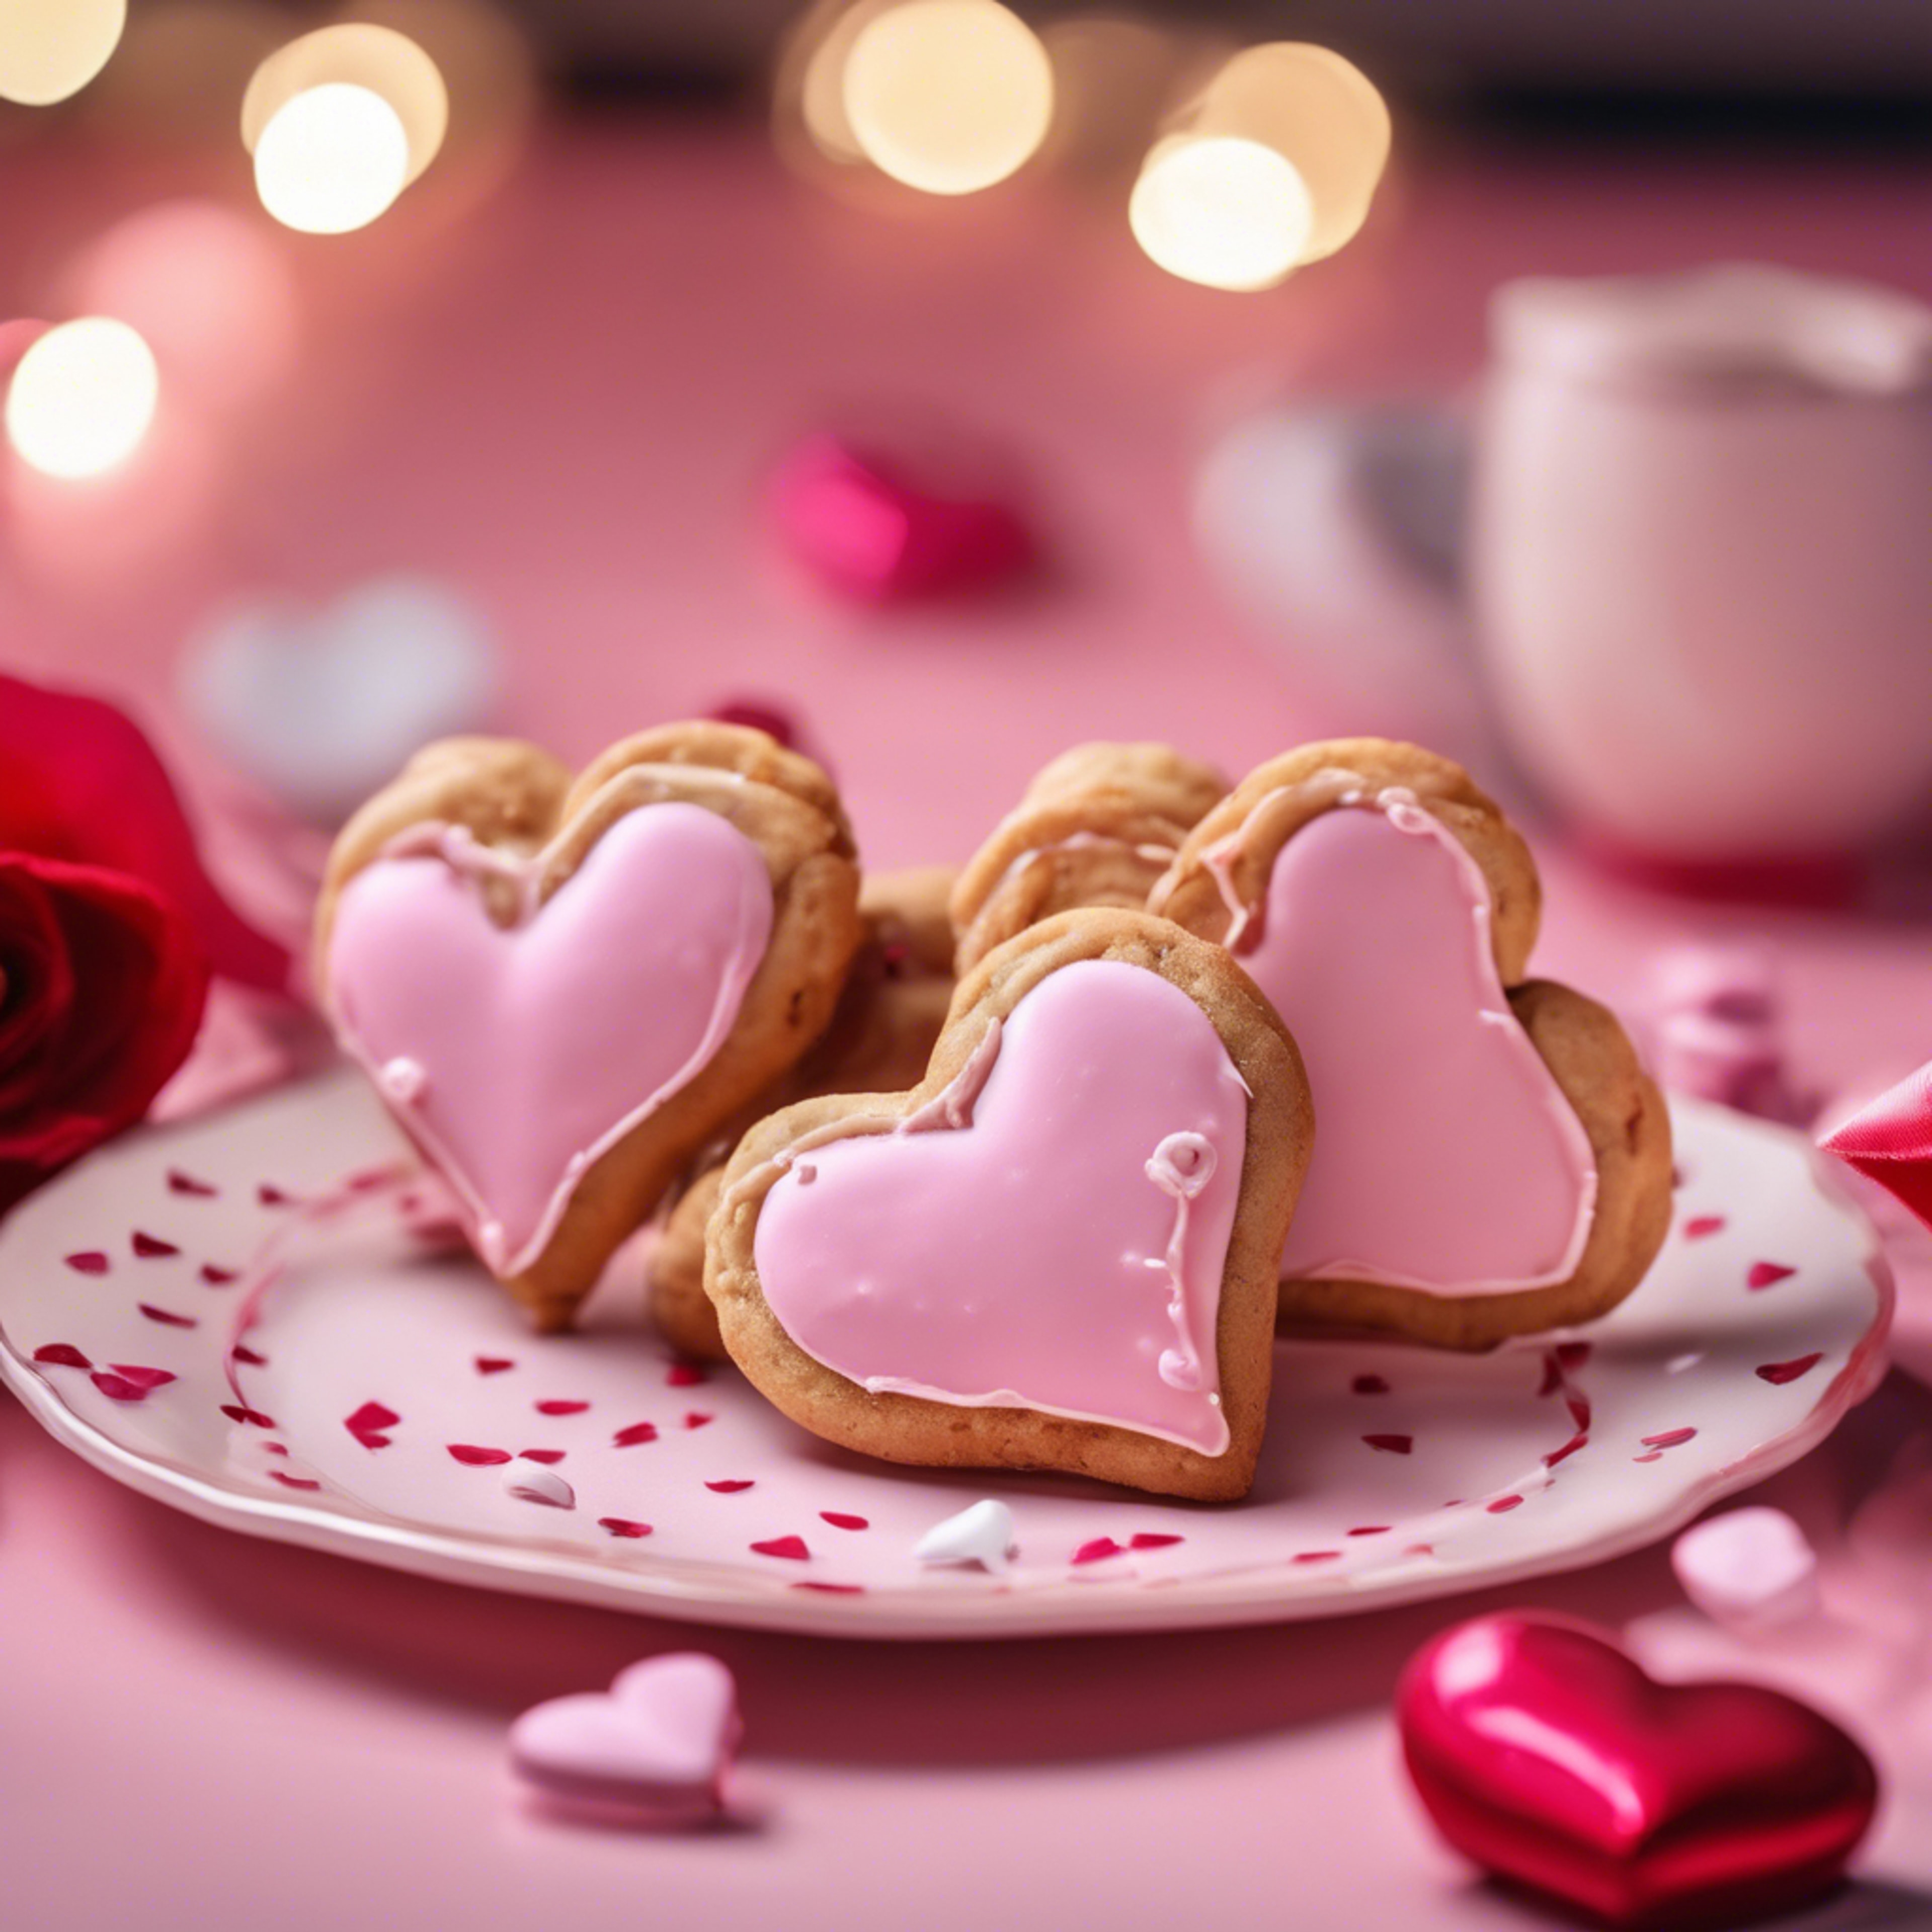 A pair of heart-shaped frosted cookies on a vibrant Valentine's day setting. Wallpaper[699c1bd667c44183af85]